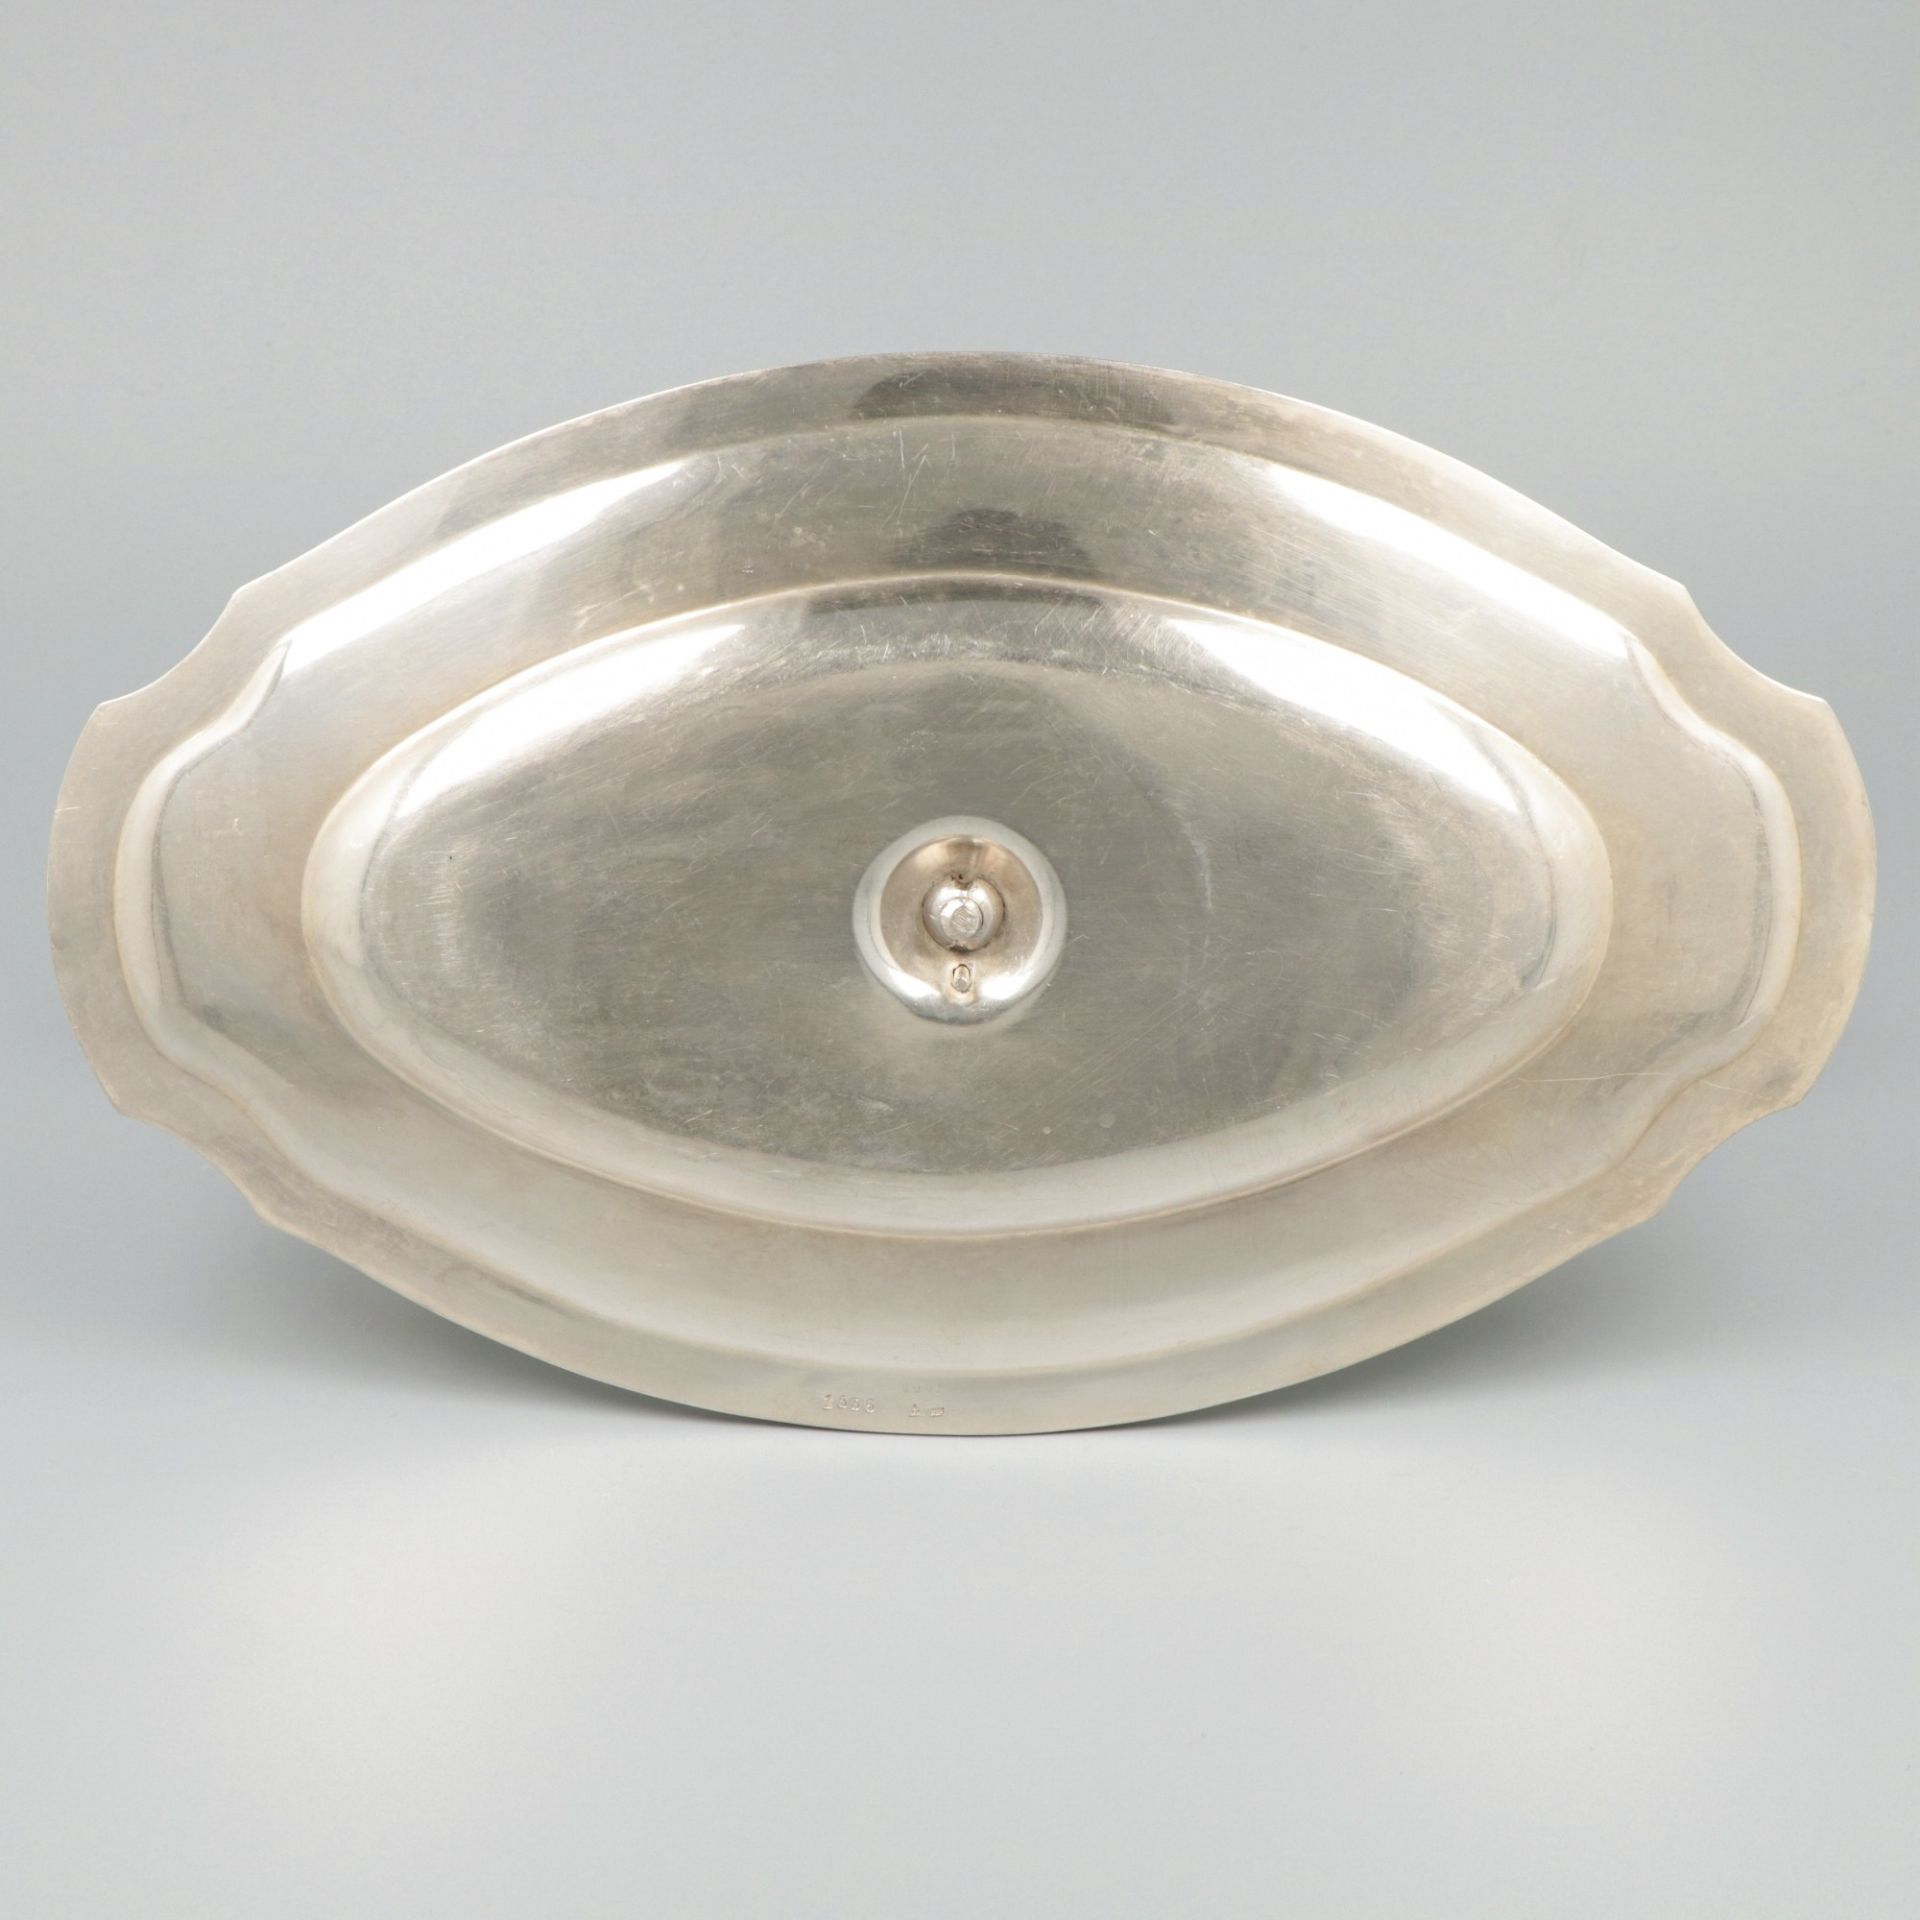 Saucière / sauce boat silver. - Image 4 of 5